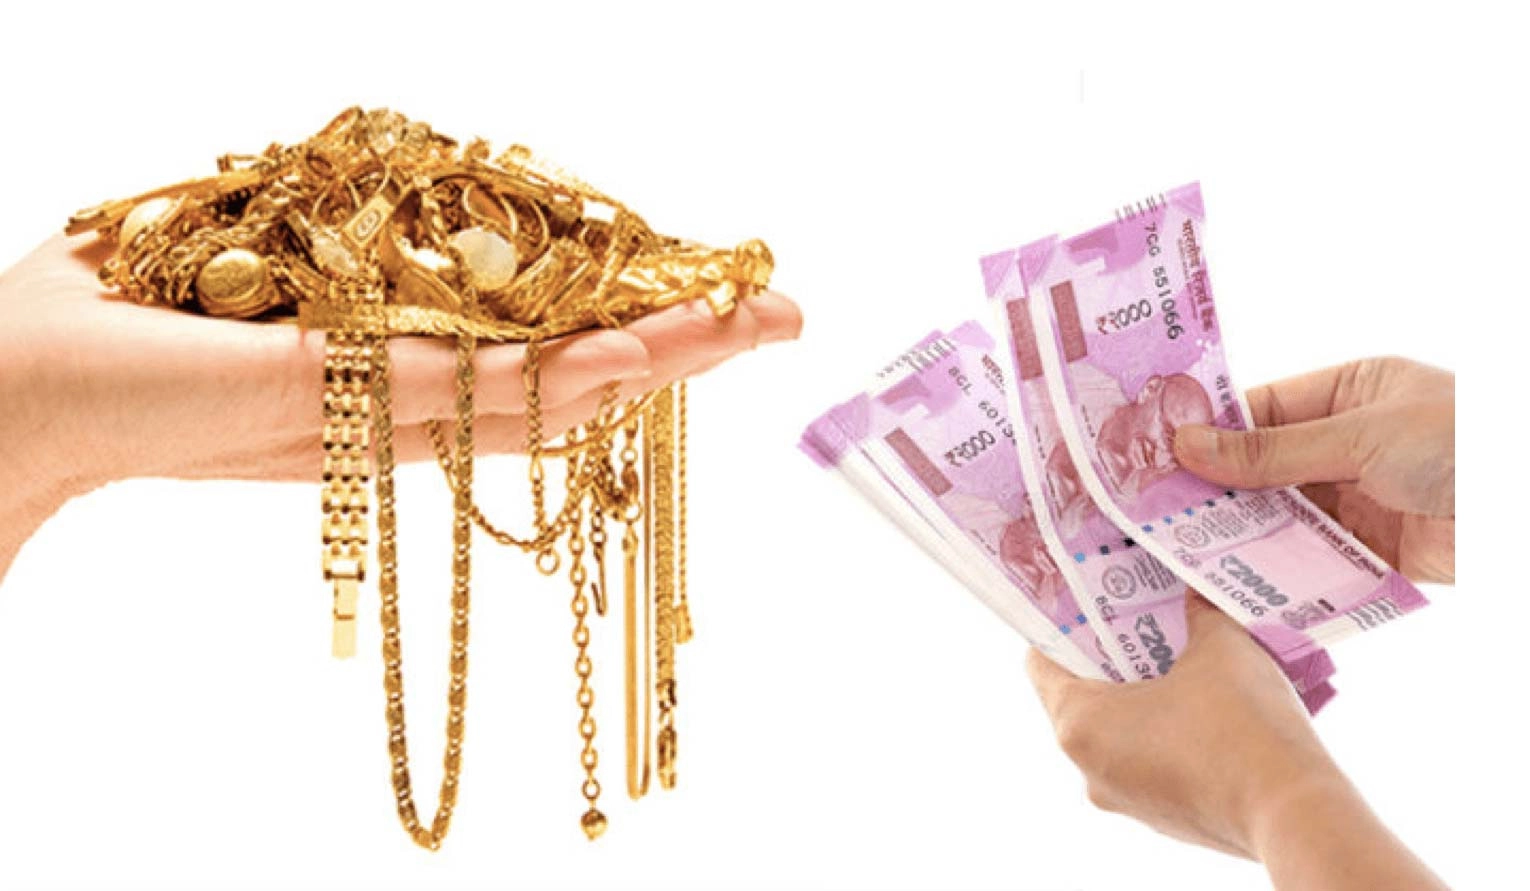 Sell Gold, Cash for Gold, Cash for Gold Chandigarh, Cash for Gold near chandigarh, gold buyer in chandigarh, second hand gold buyer in chandigarh, Sell gold in chandigarh, Cash for Gold in chandigarh, Sell Gold for Cash in chandigarh